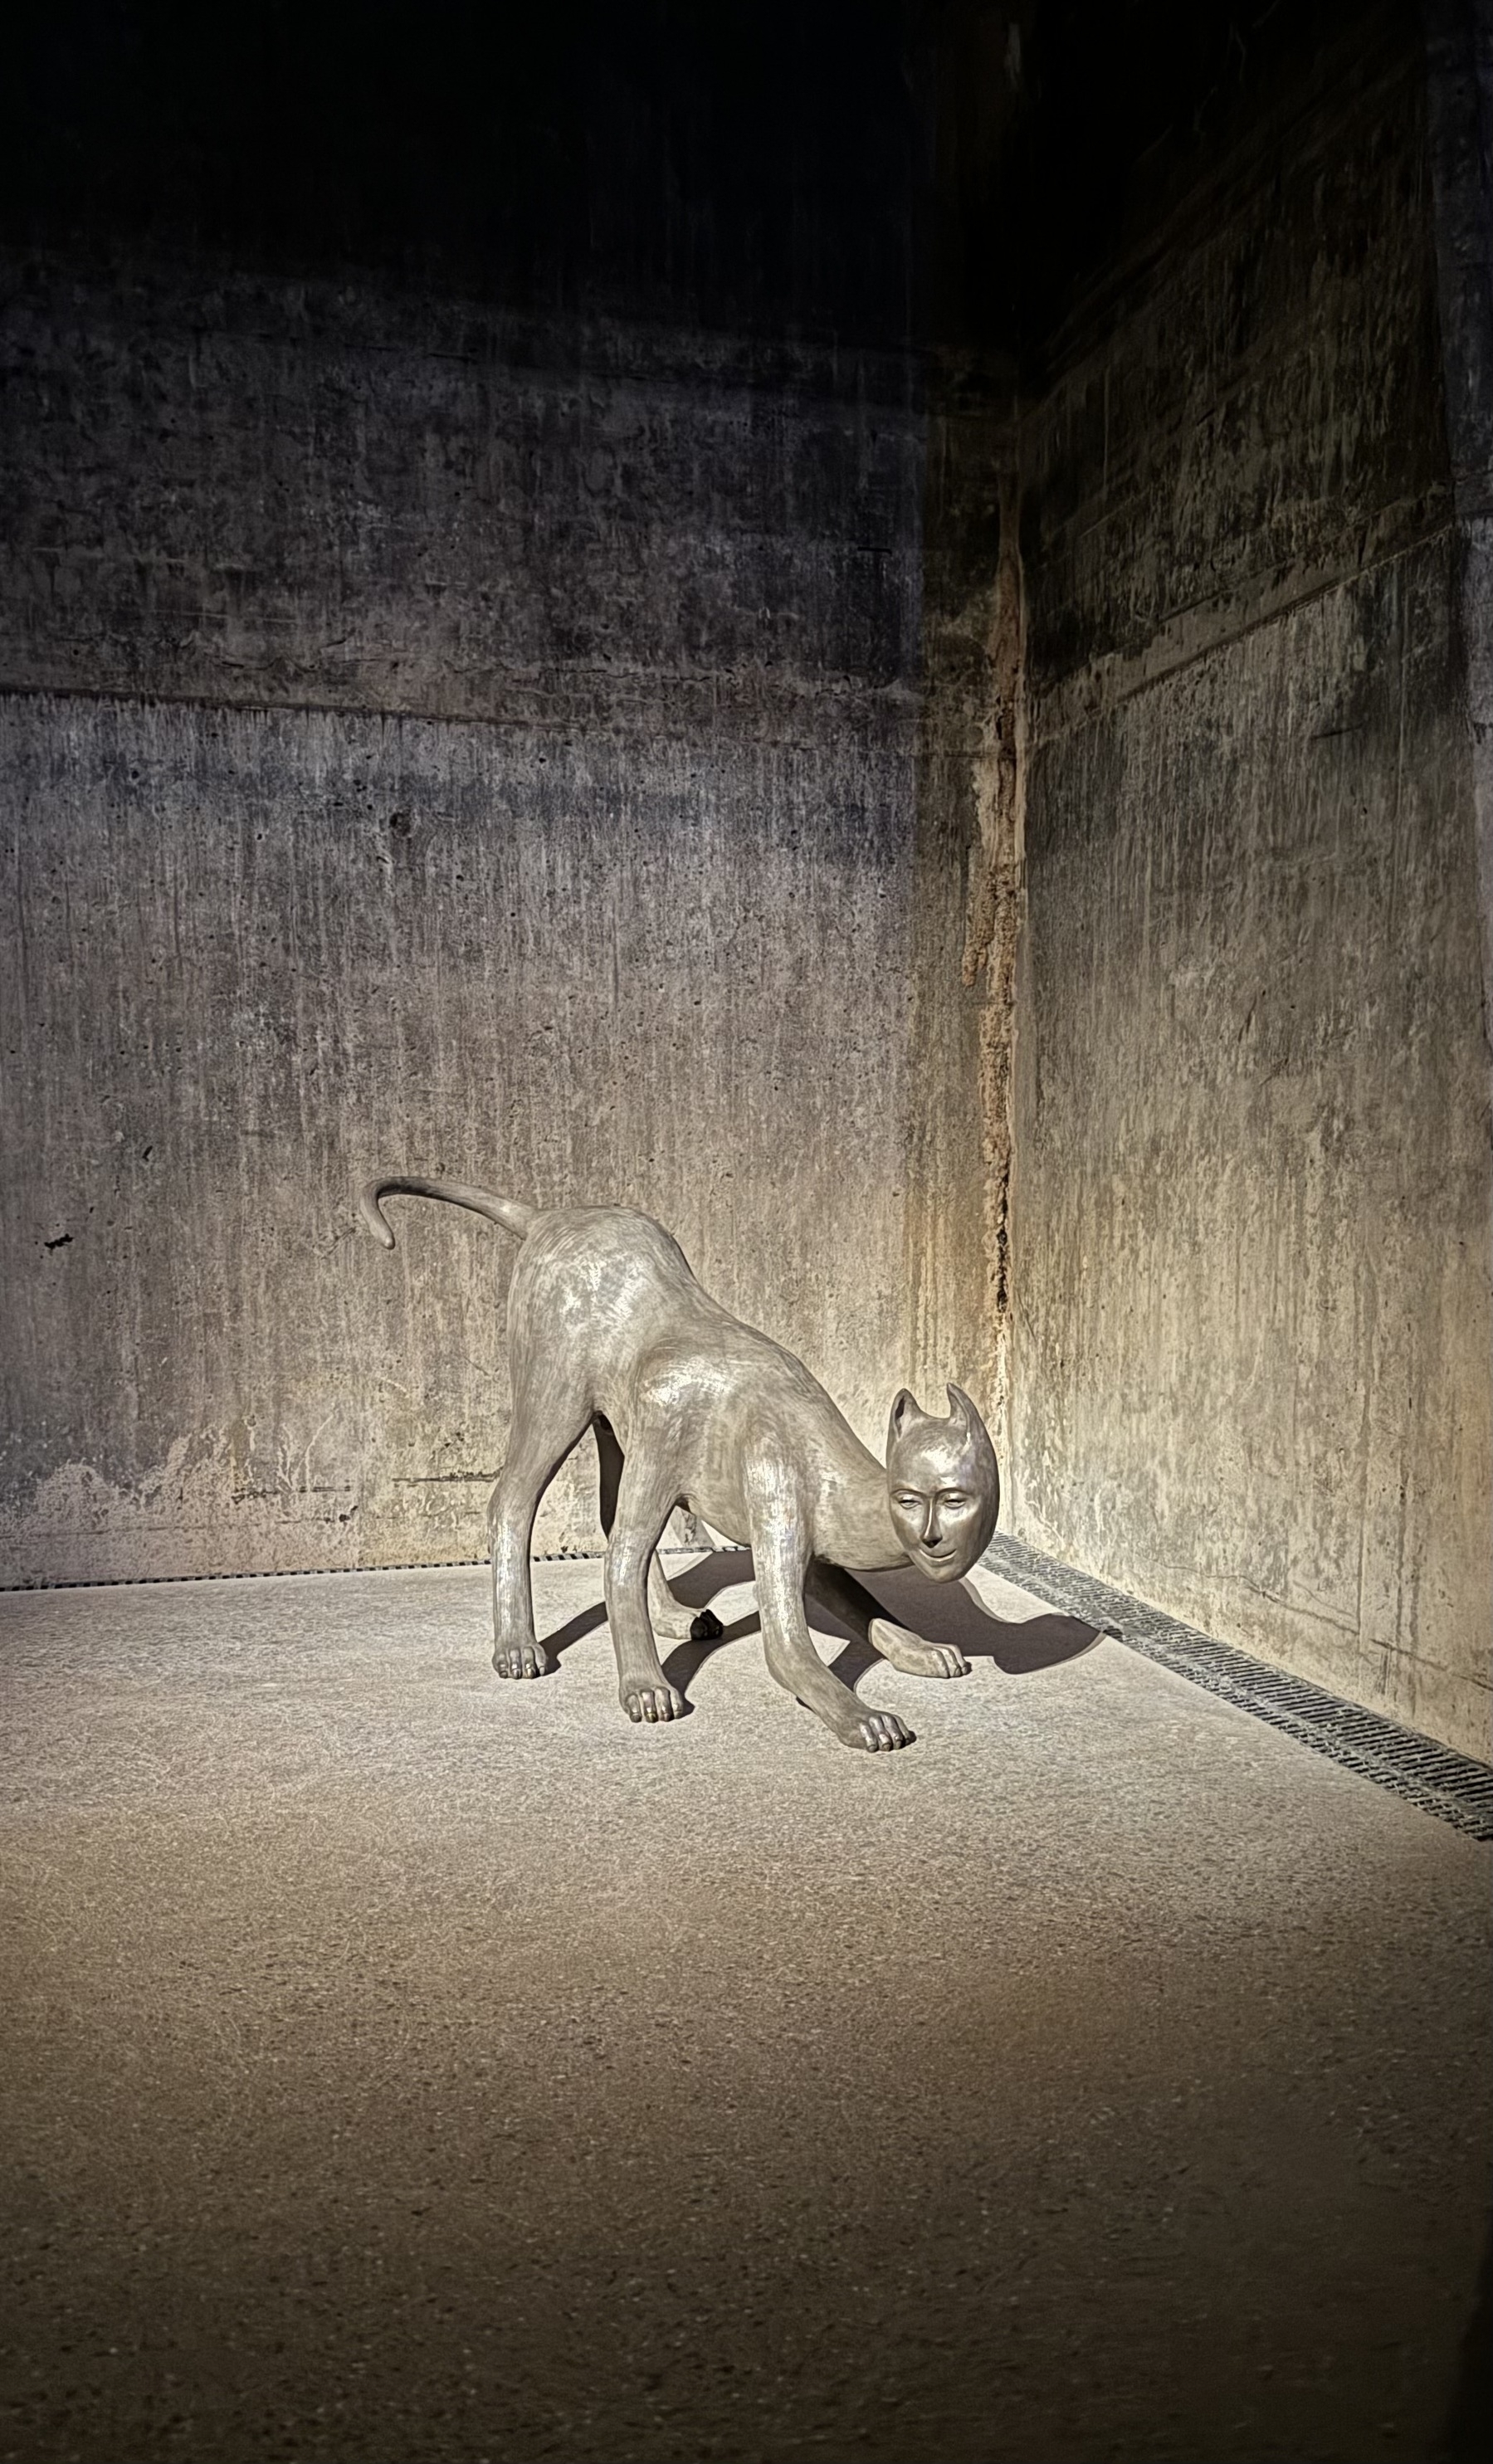 Sculpture of a six legged cat with a human face. From the Louise Bourgeois exhibition at Art Gallery NSW.